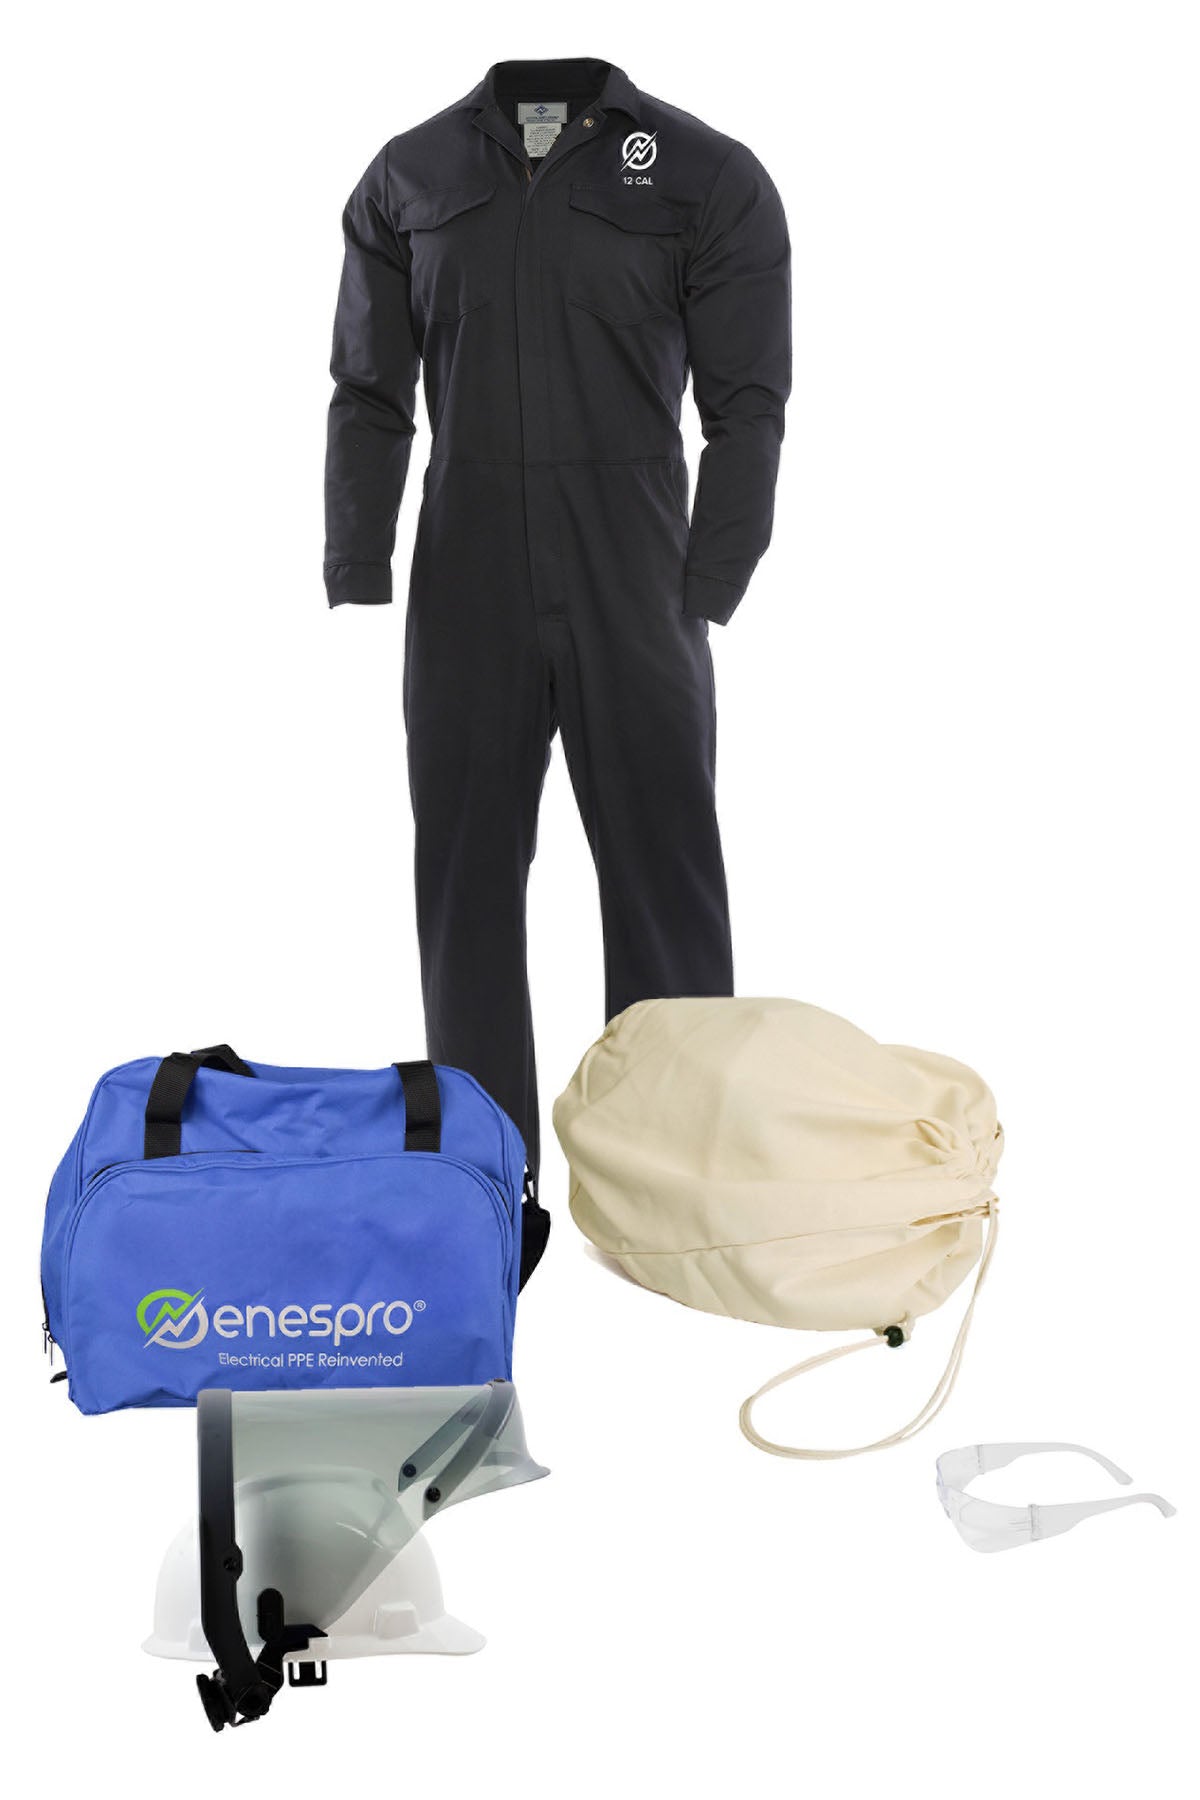 Enespro ArcGuard 12 cal Coverall Arc Flash Kit- No Gloves